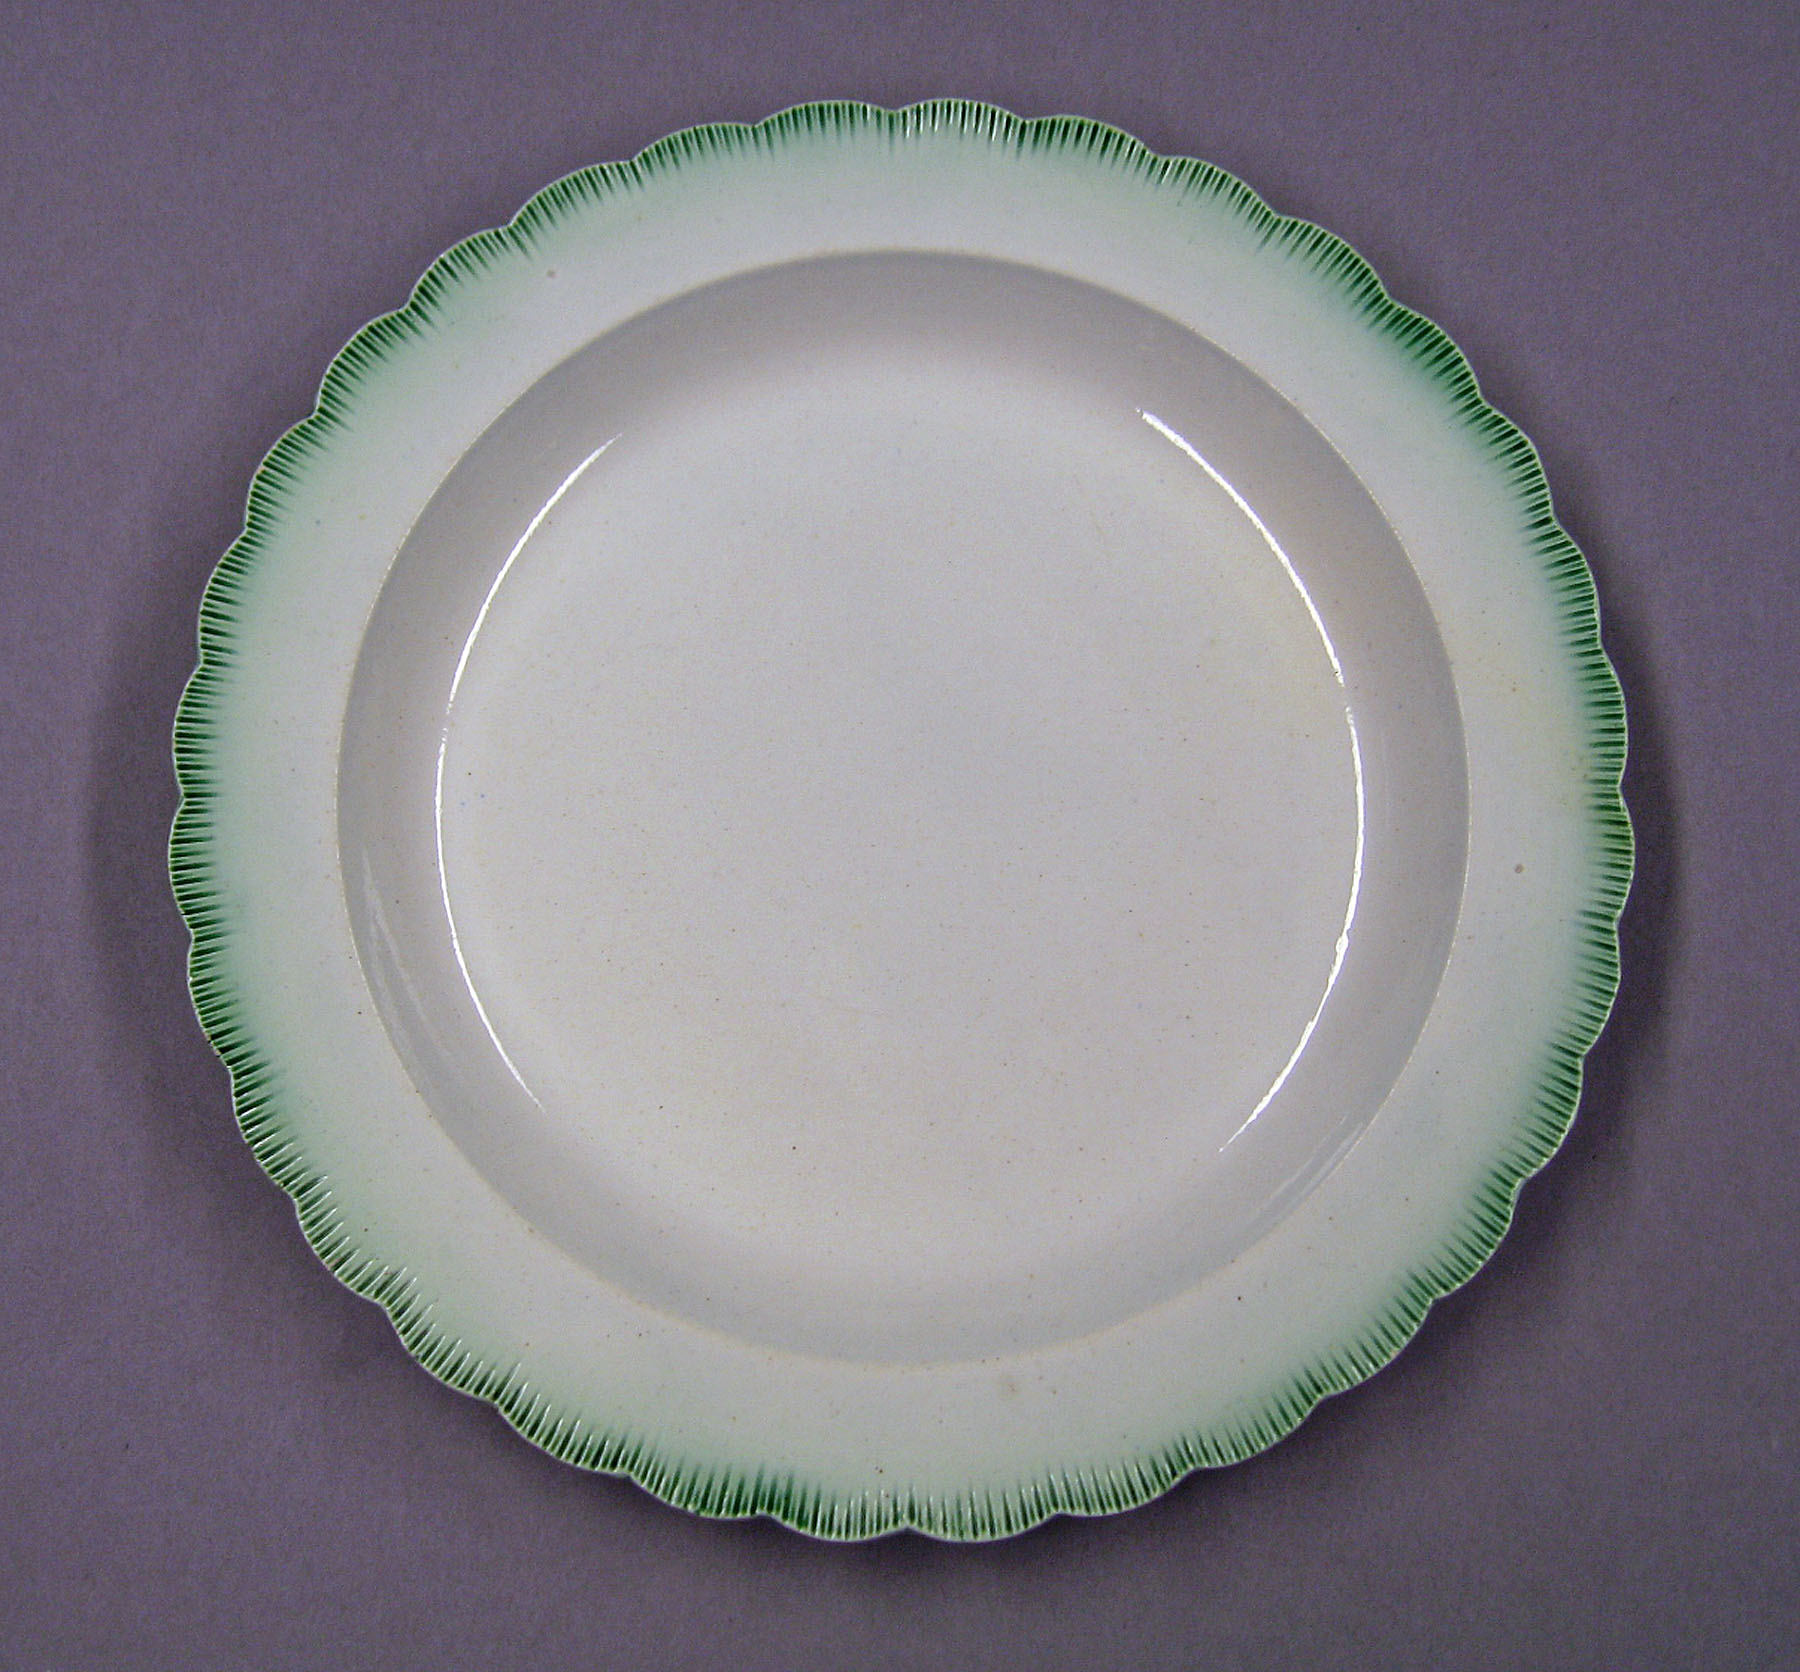 1969.0867.001 Pearlware plate marked SEWELL